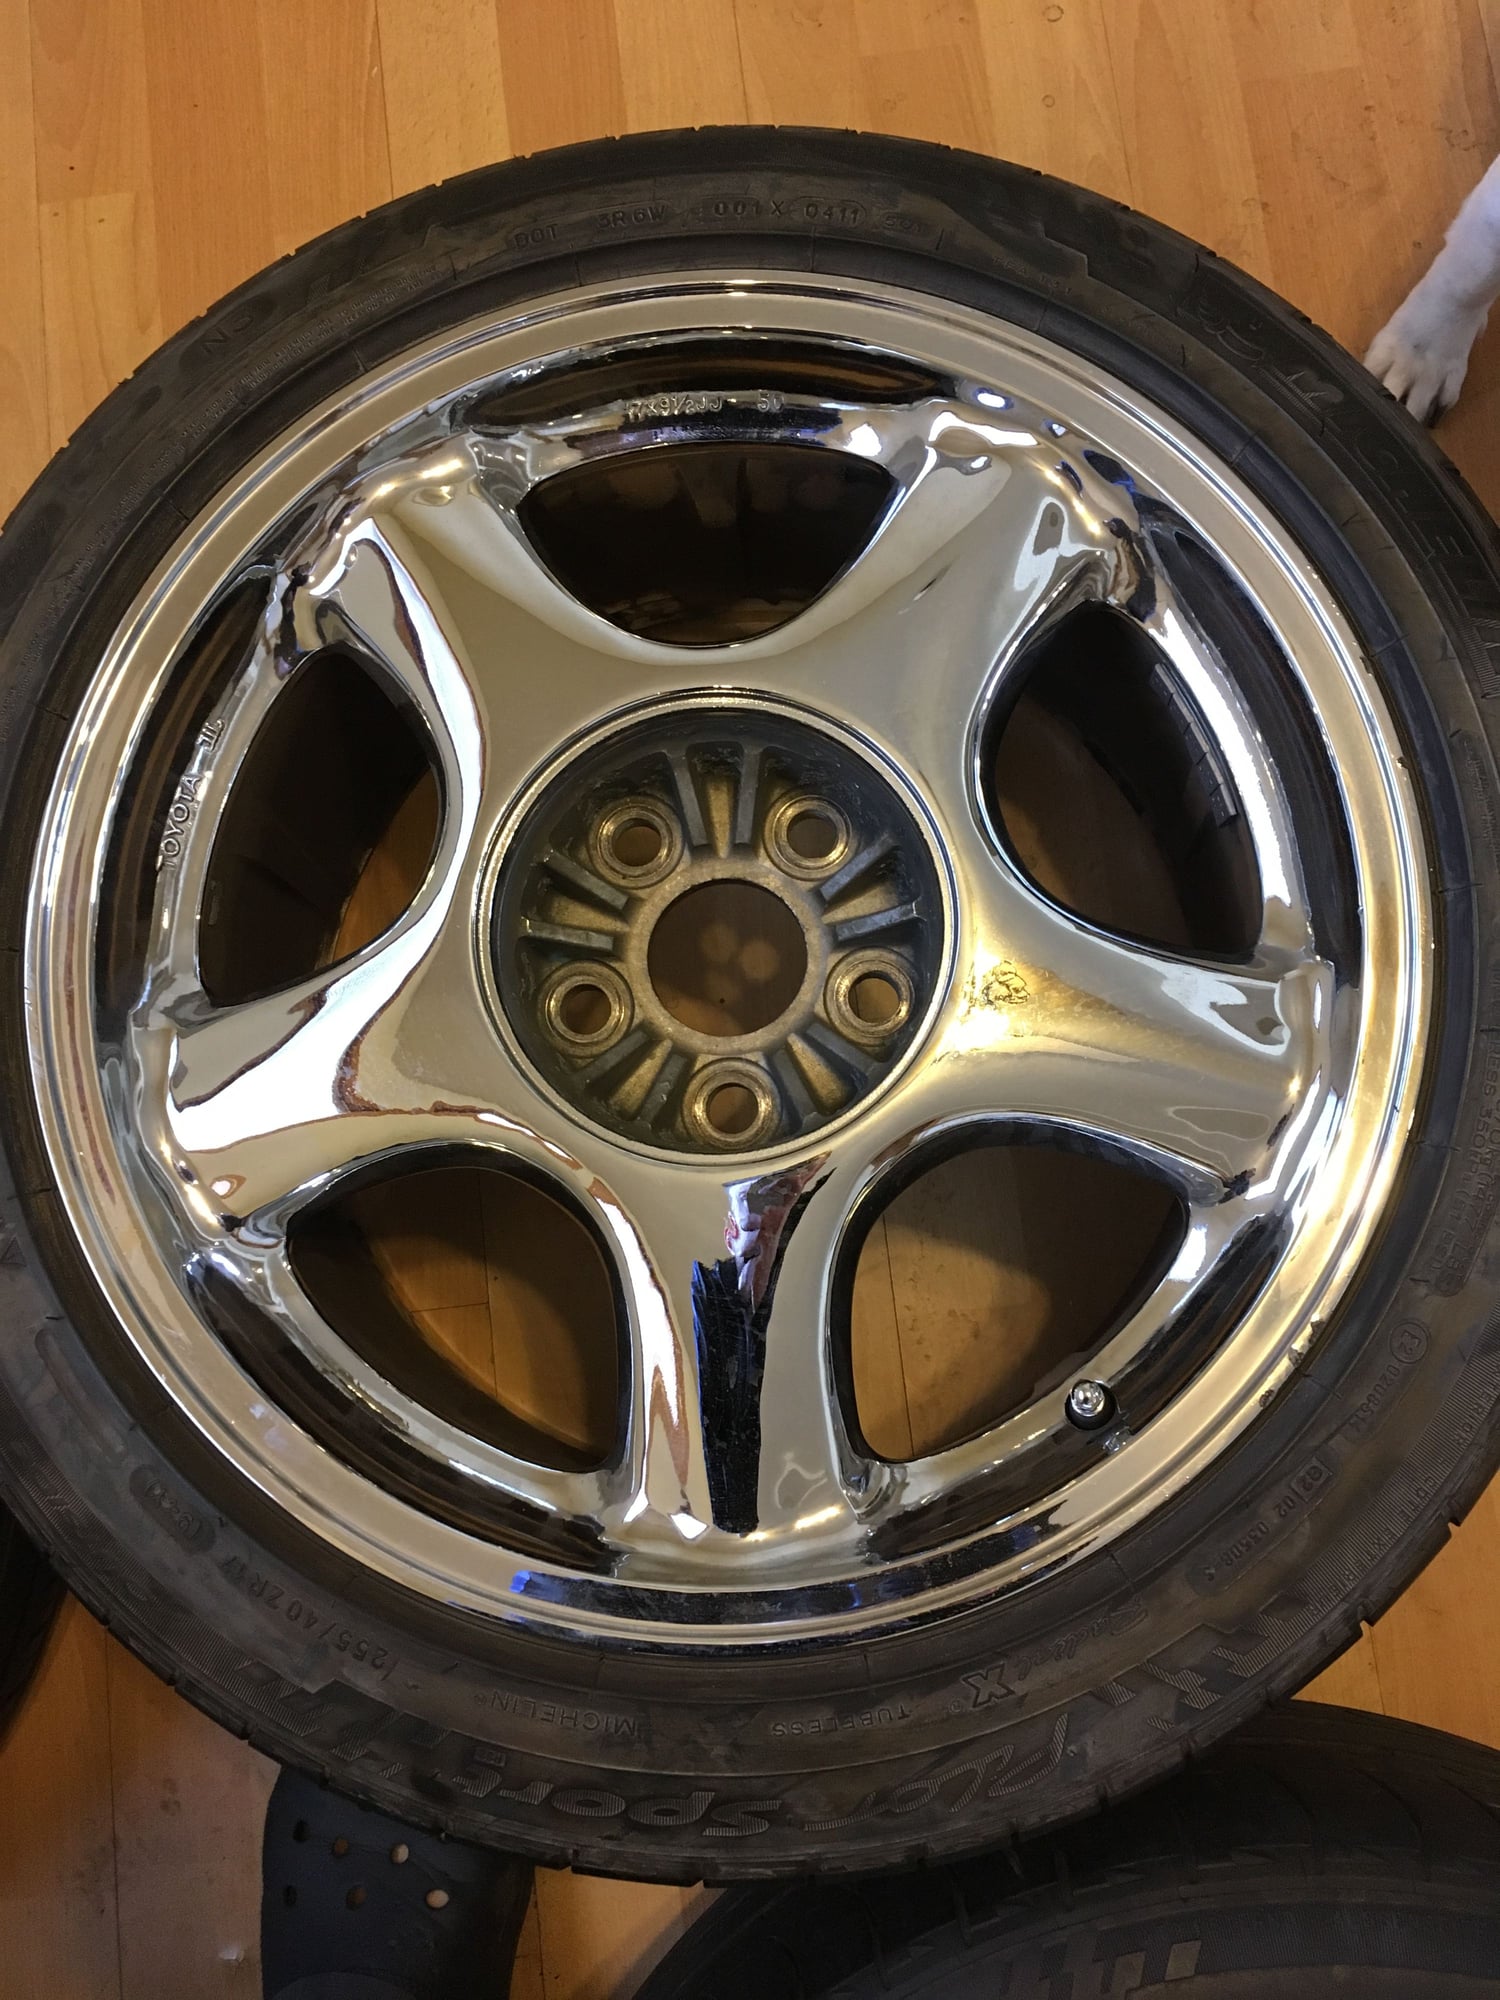 Miscellaneous - Out of the SC Game sale, selling off all my parts, Rims, interior wood wheel etc. - Used - 1992 to 2000 Lexus SC300 - Longmont, CO 80503, United States